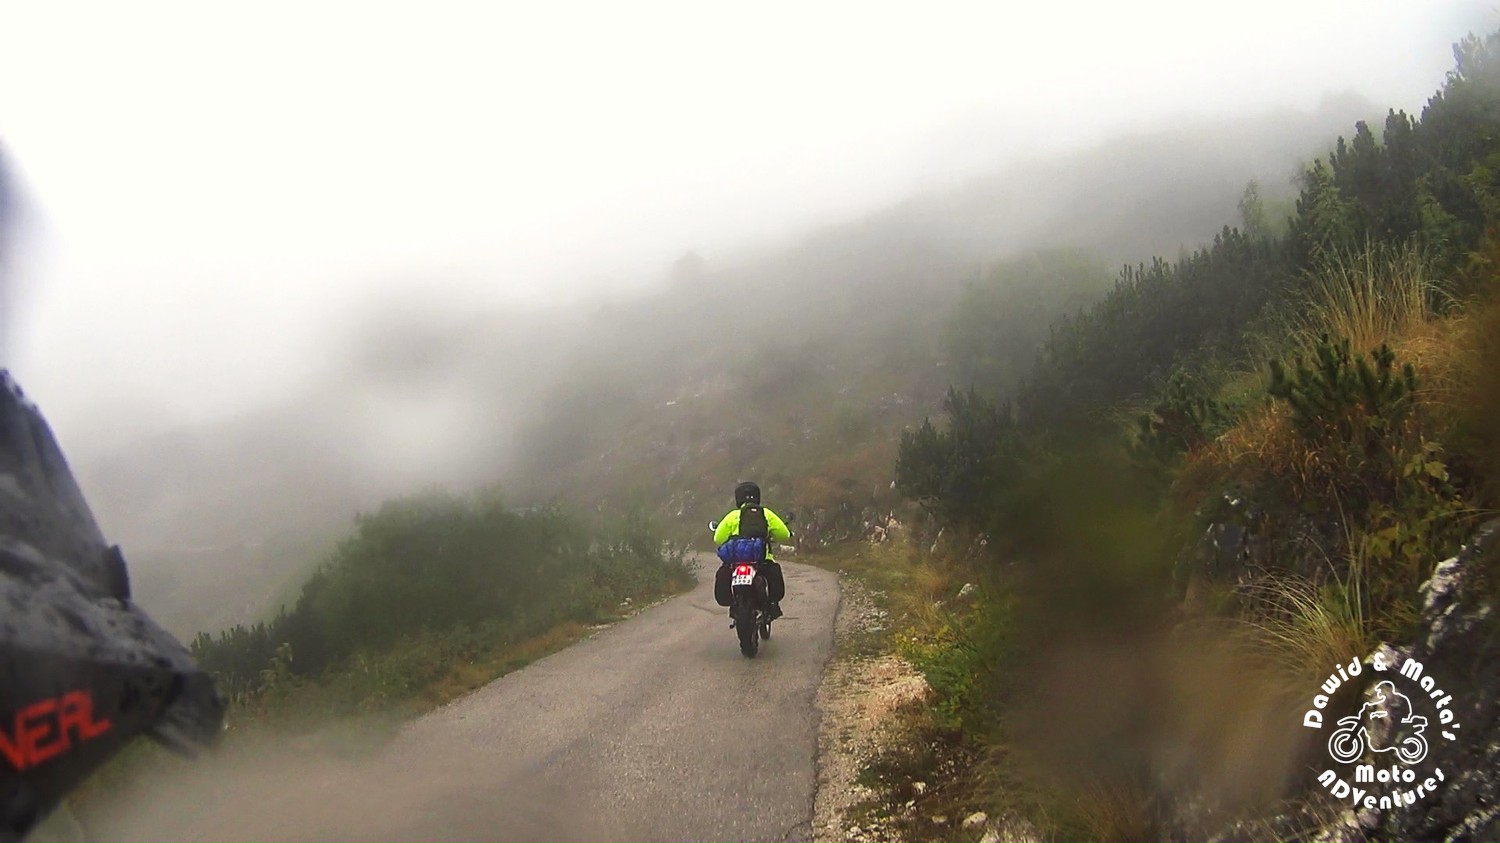 Riding down Tara Canyon in the fog in September